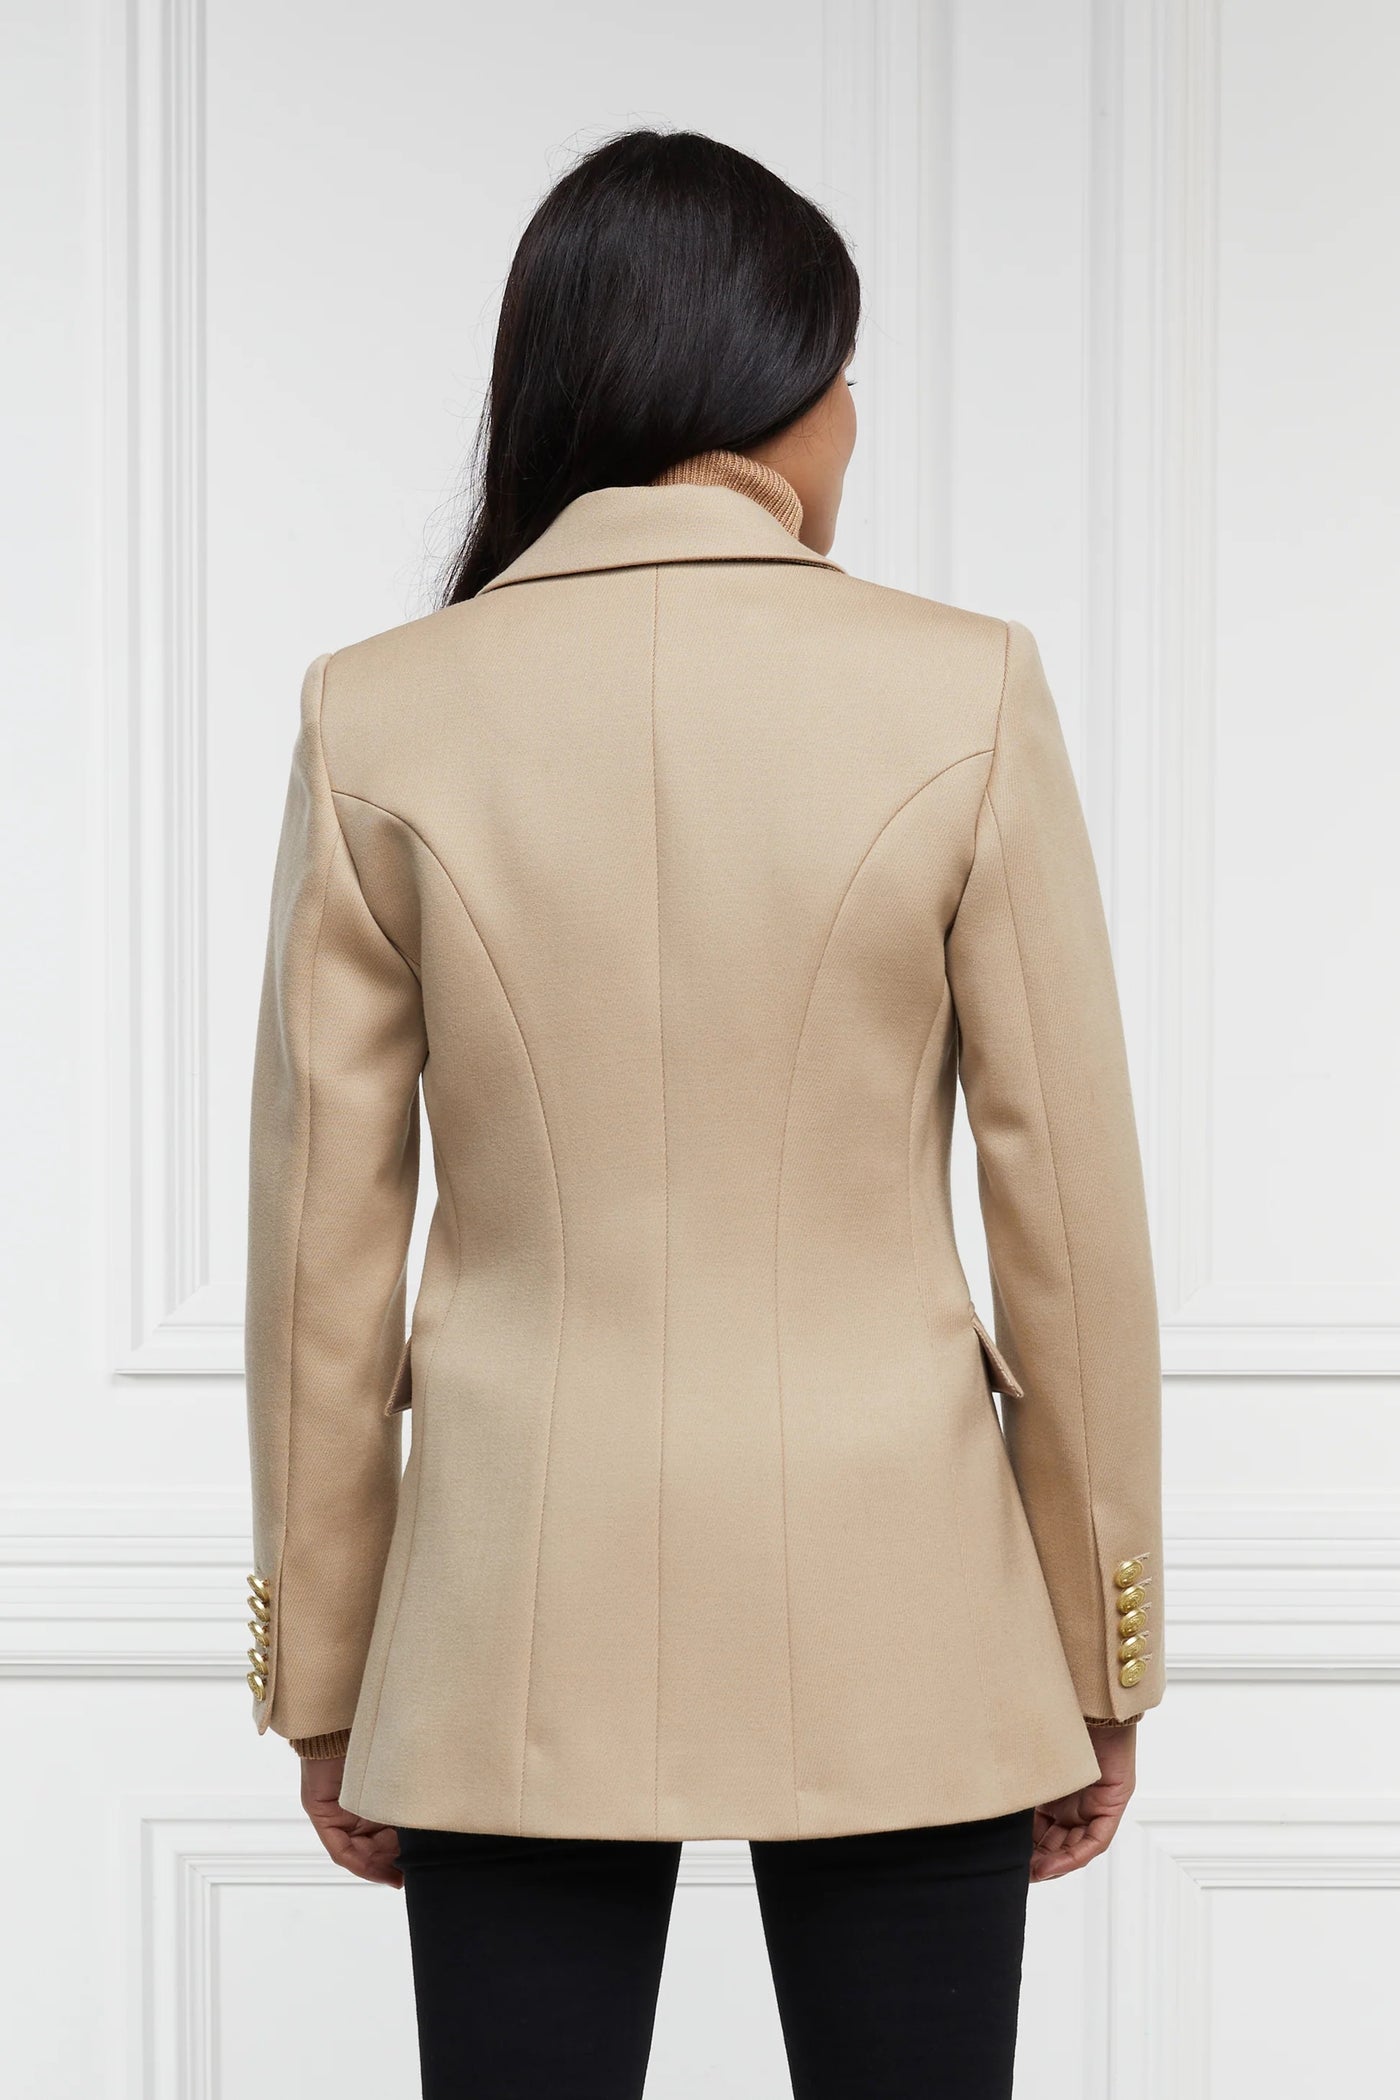 Holland Cooper Double Breasted Ladies Blazer in Camel Twill Model Back